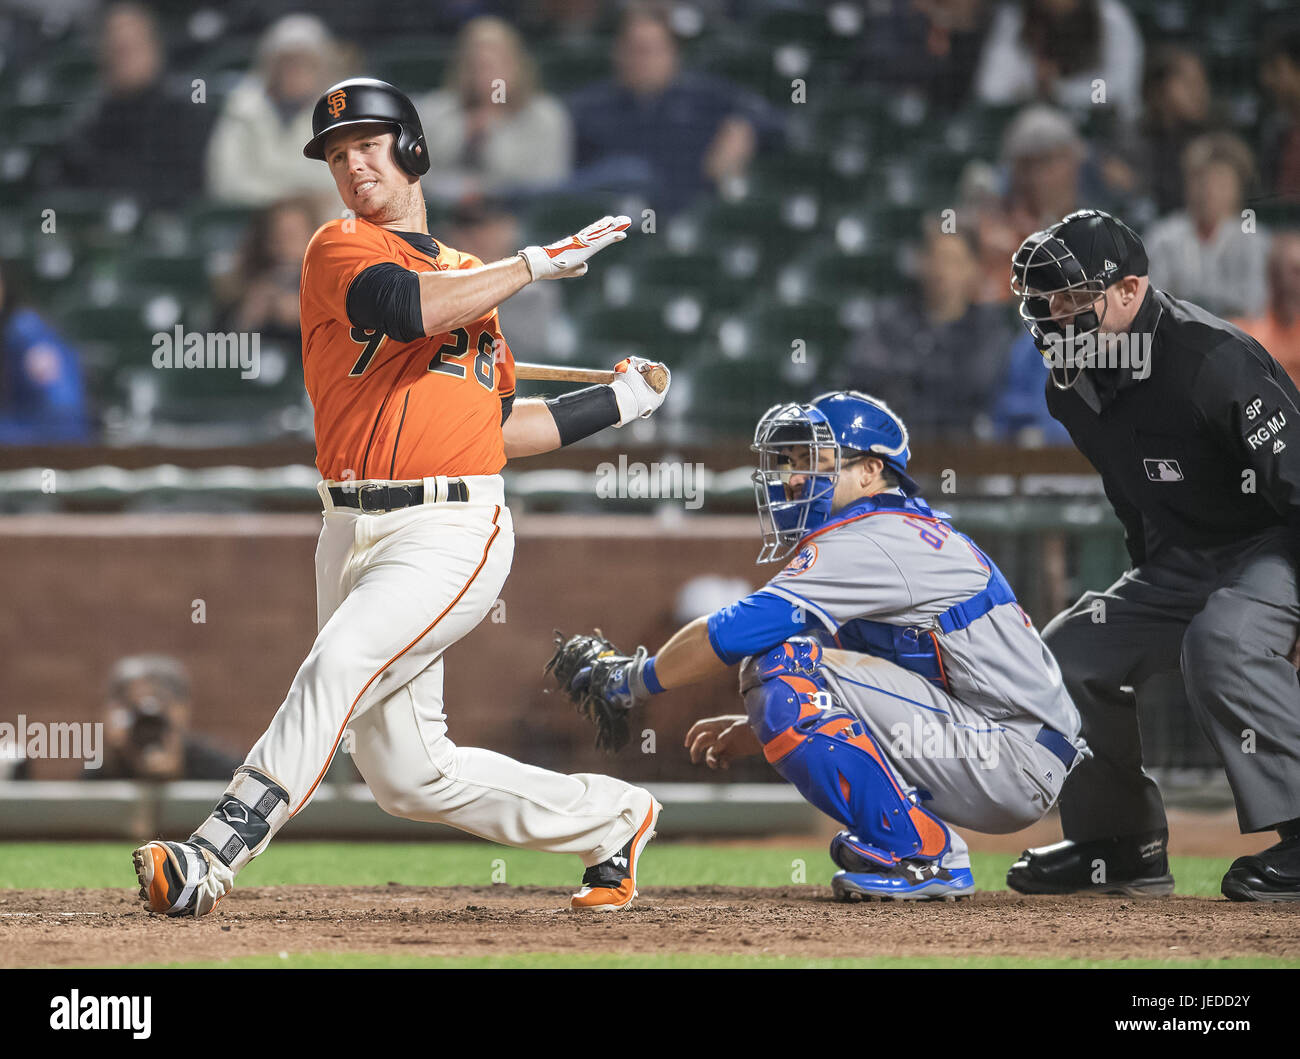 San Francisco, California, USA. 23rd June, 2017. Pinch hitting in the ninth inning, San Francisco Giants catcher Buster Posey (28) flied out to the warning track, during a MLB baseball game between the New York Mets and the San Francisco Giants on ''Orange Friday'' at AT&T Park in San Francisco, California. Valerie Shoaps/CSM/Alamy Live News Stock Photo